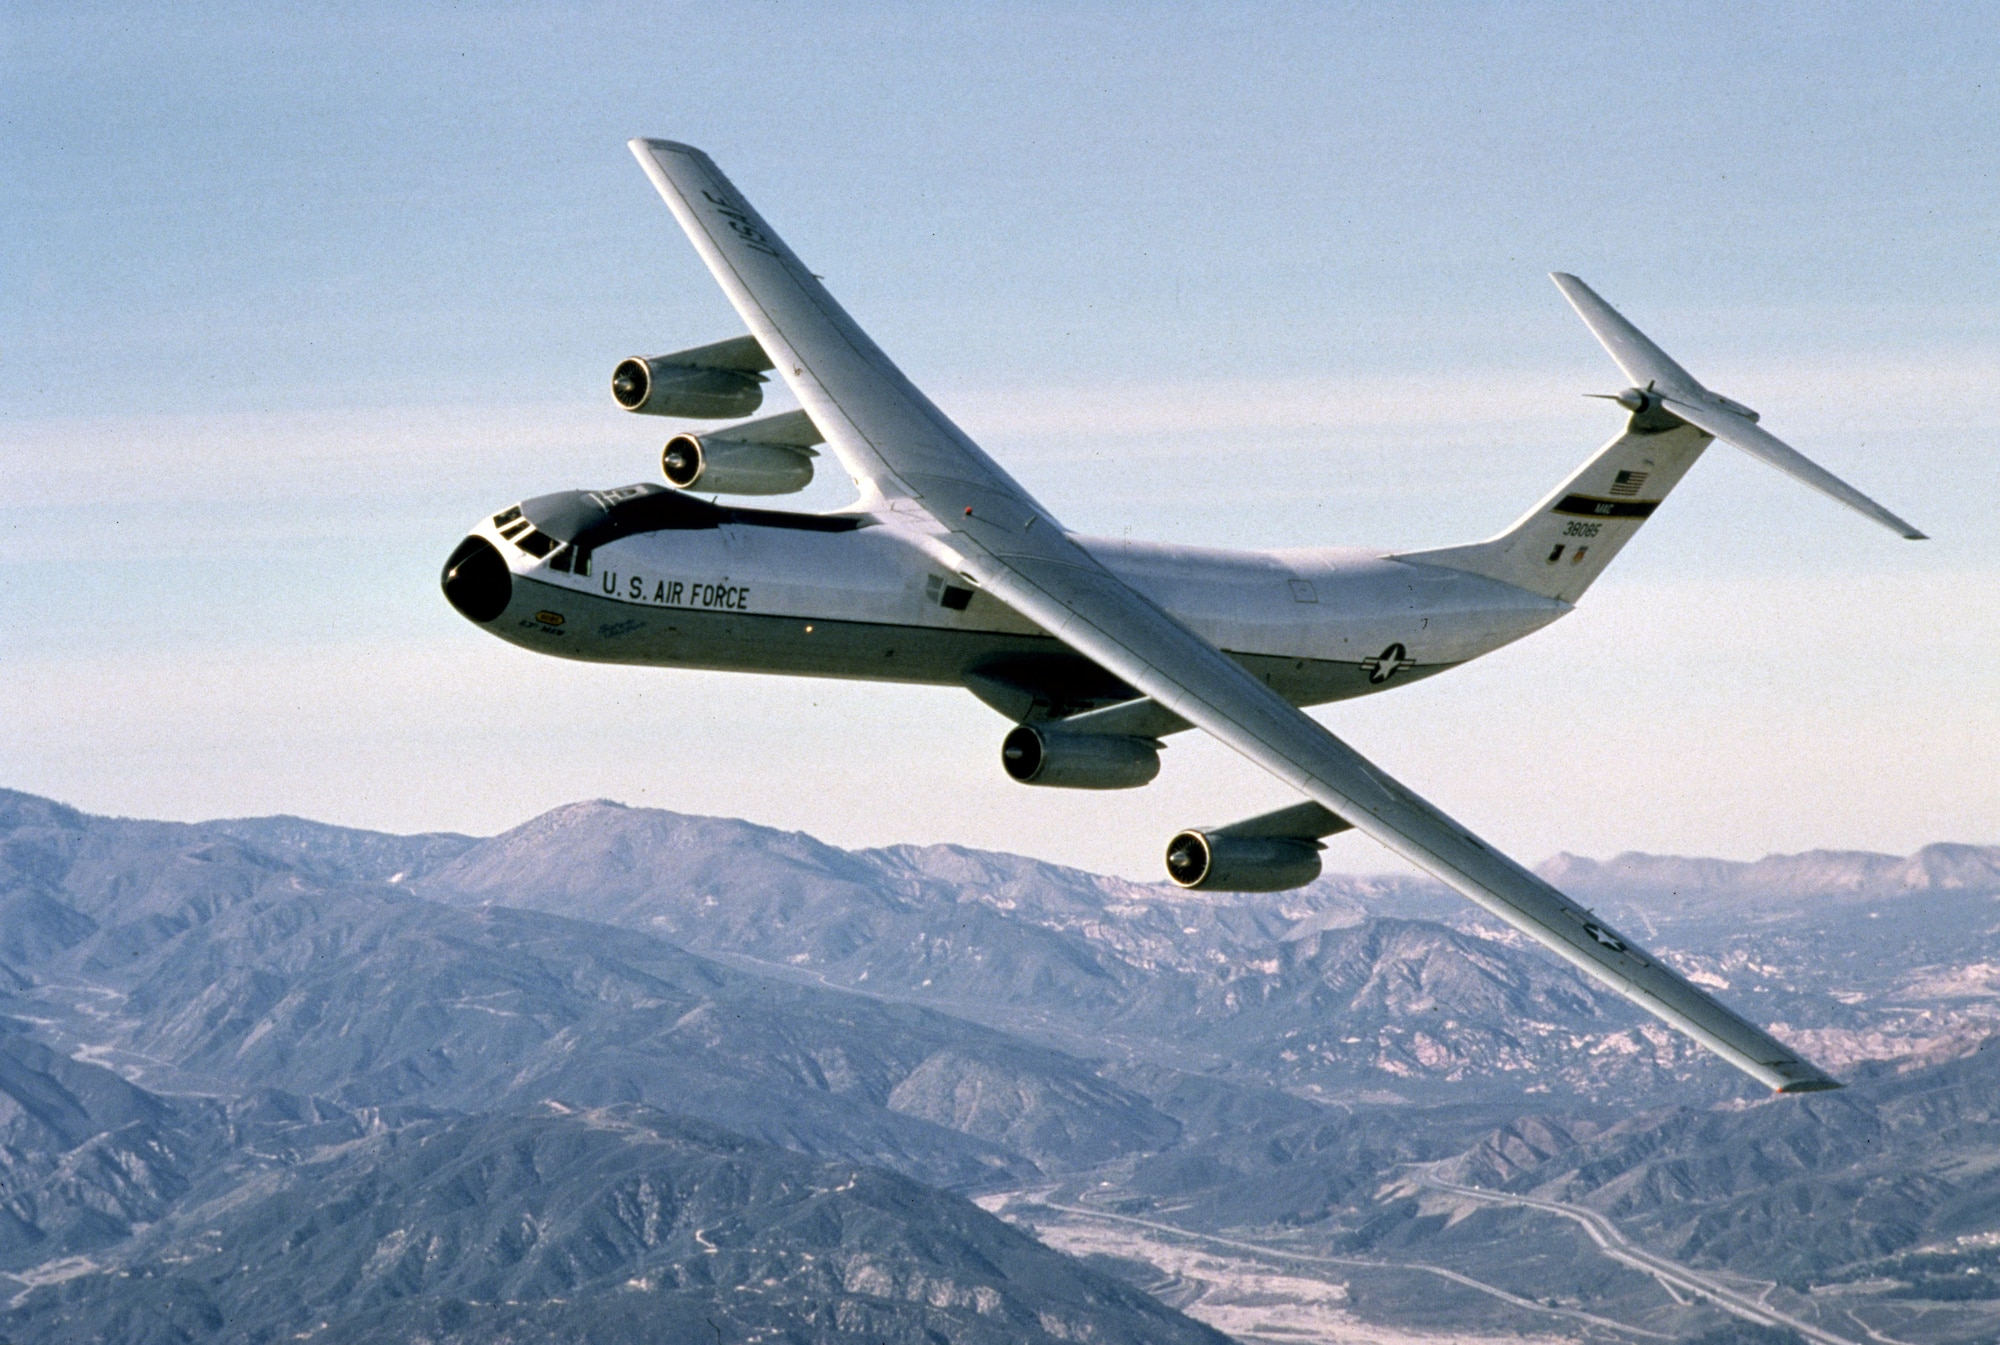 C-141 Starlifter, October 1964. (U.S. Air Force photo)